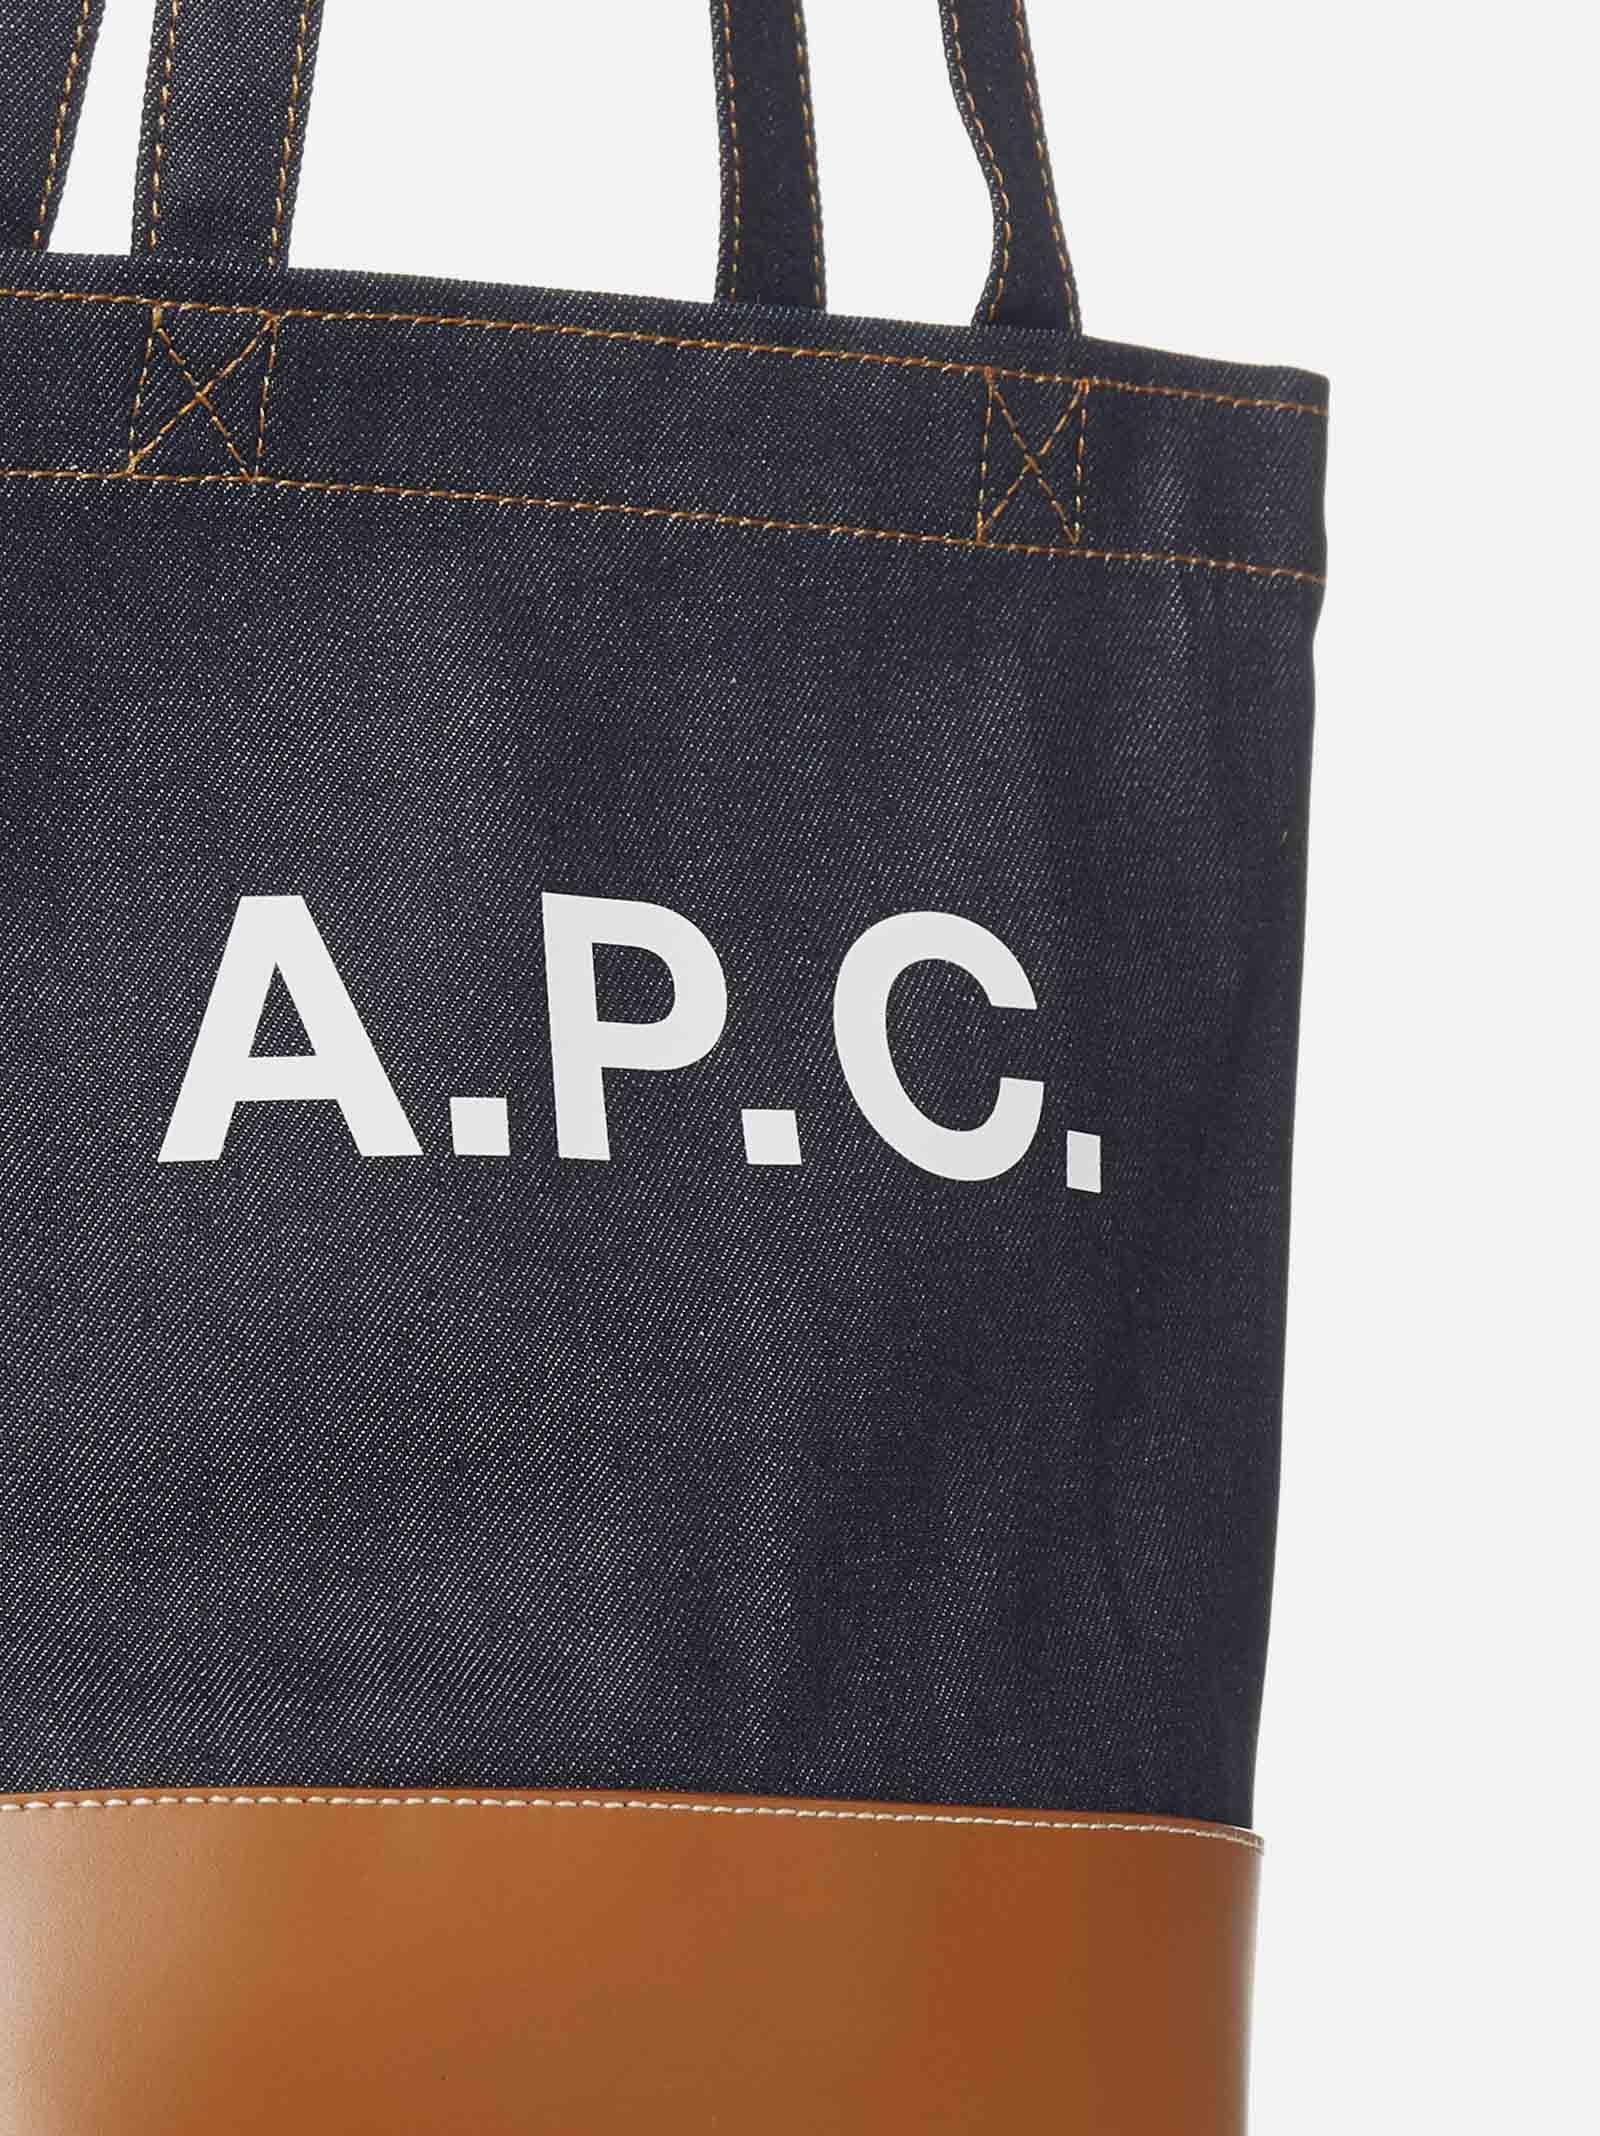 A.P.C. Axel Denim Small Tote Bag in Black | Lyst